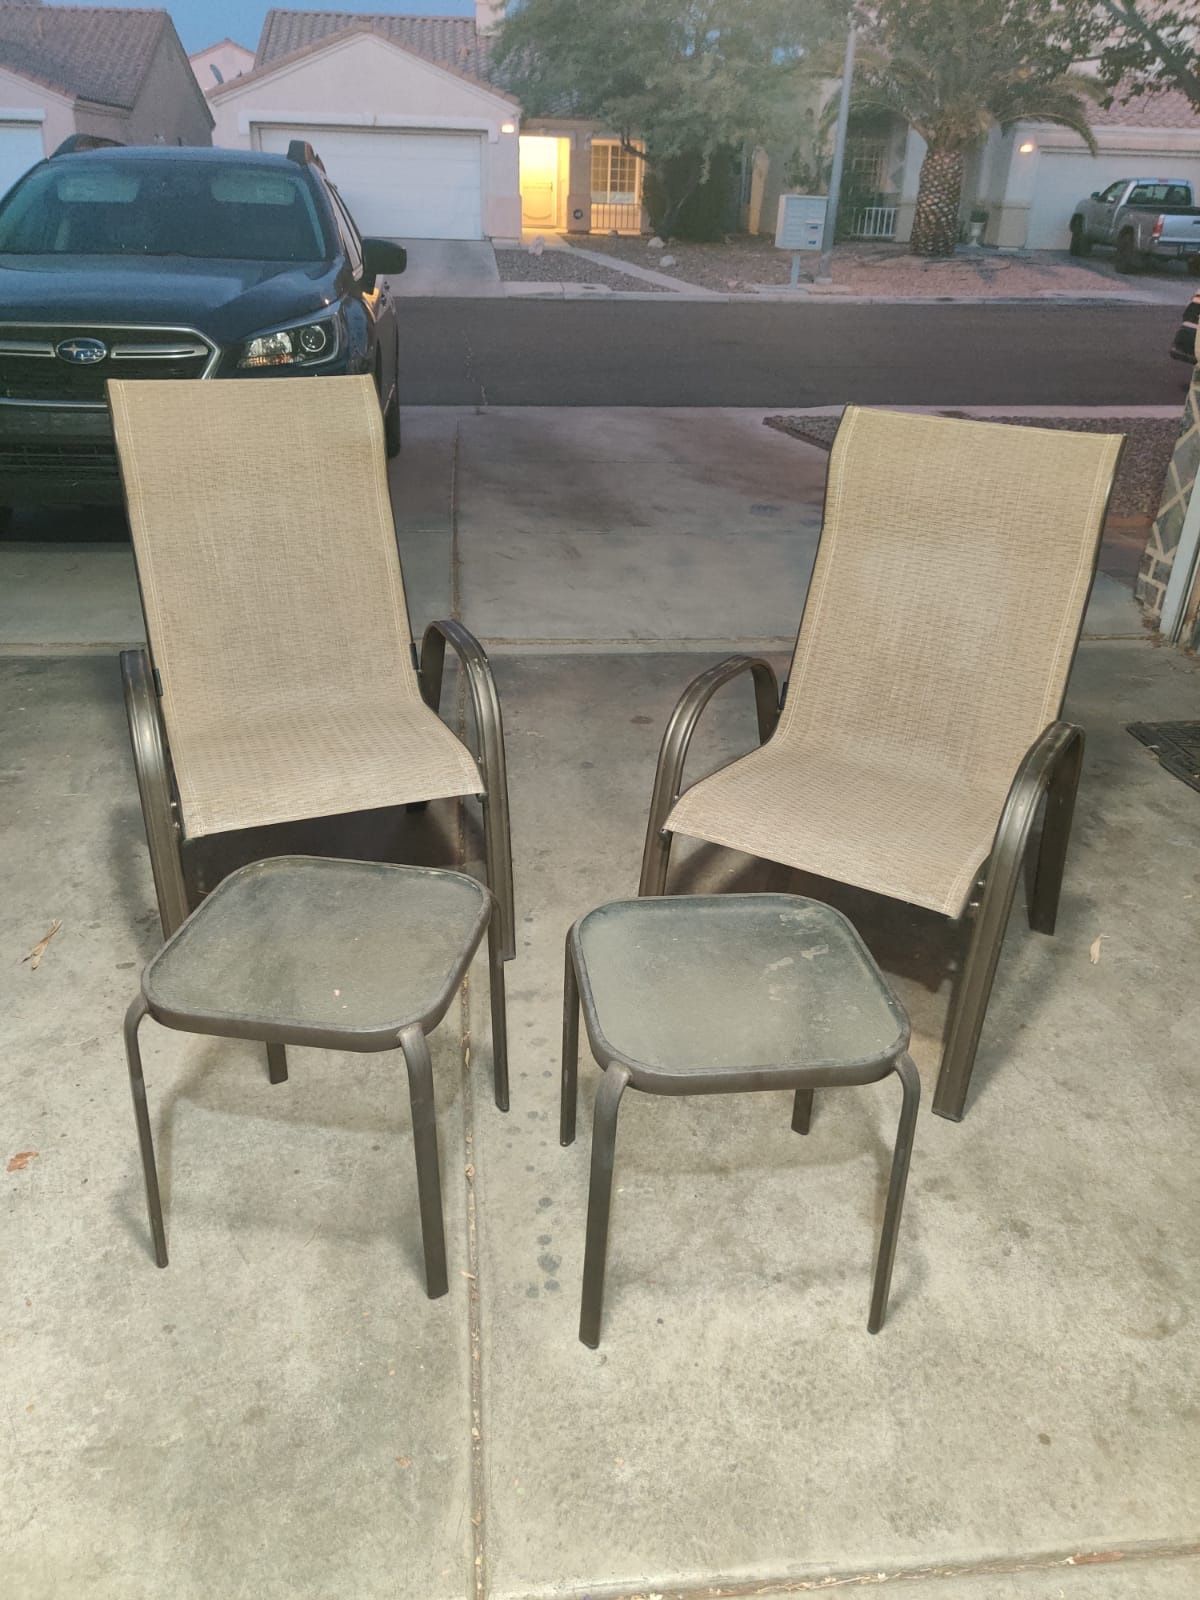 Patio chairs and side tables